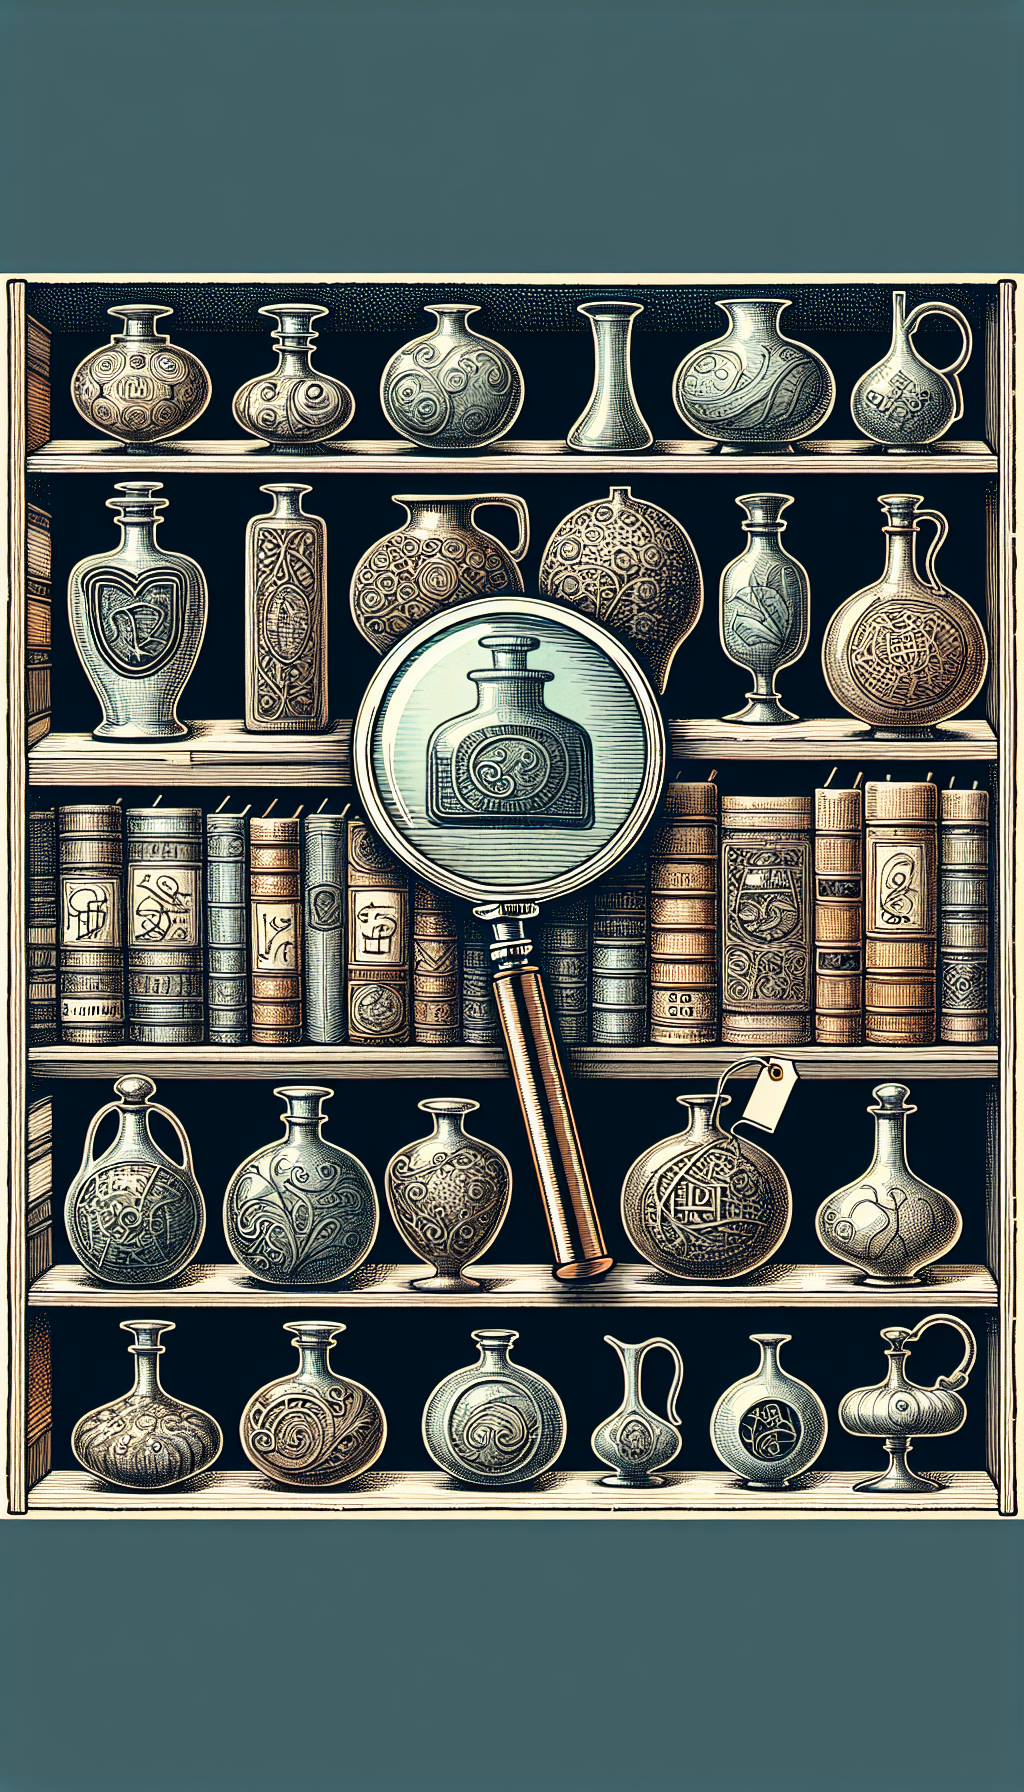 An intricate illustration featuring a library of antique decanters, each with a distinct silhouette and color palette, artistically labeled with calligraphic tags. A magnifying glass hovers over one, revealing etched patterns and a maker's mark, symbolizing identification. The styles vary from stained glass to pencil sketches, reflecting the diversity and history behind each unique decanter.